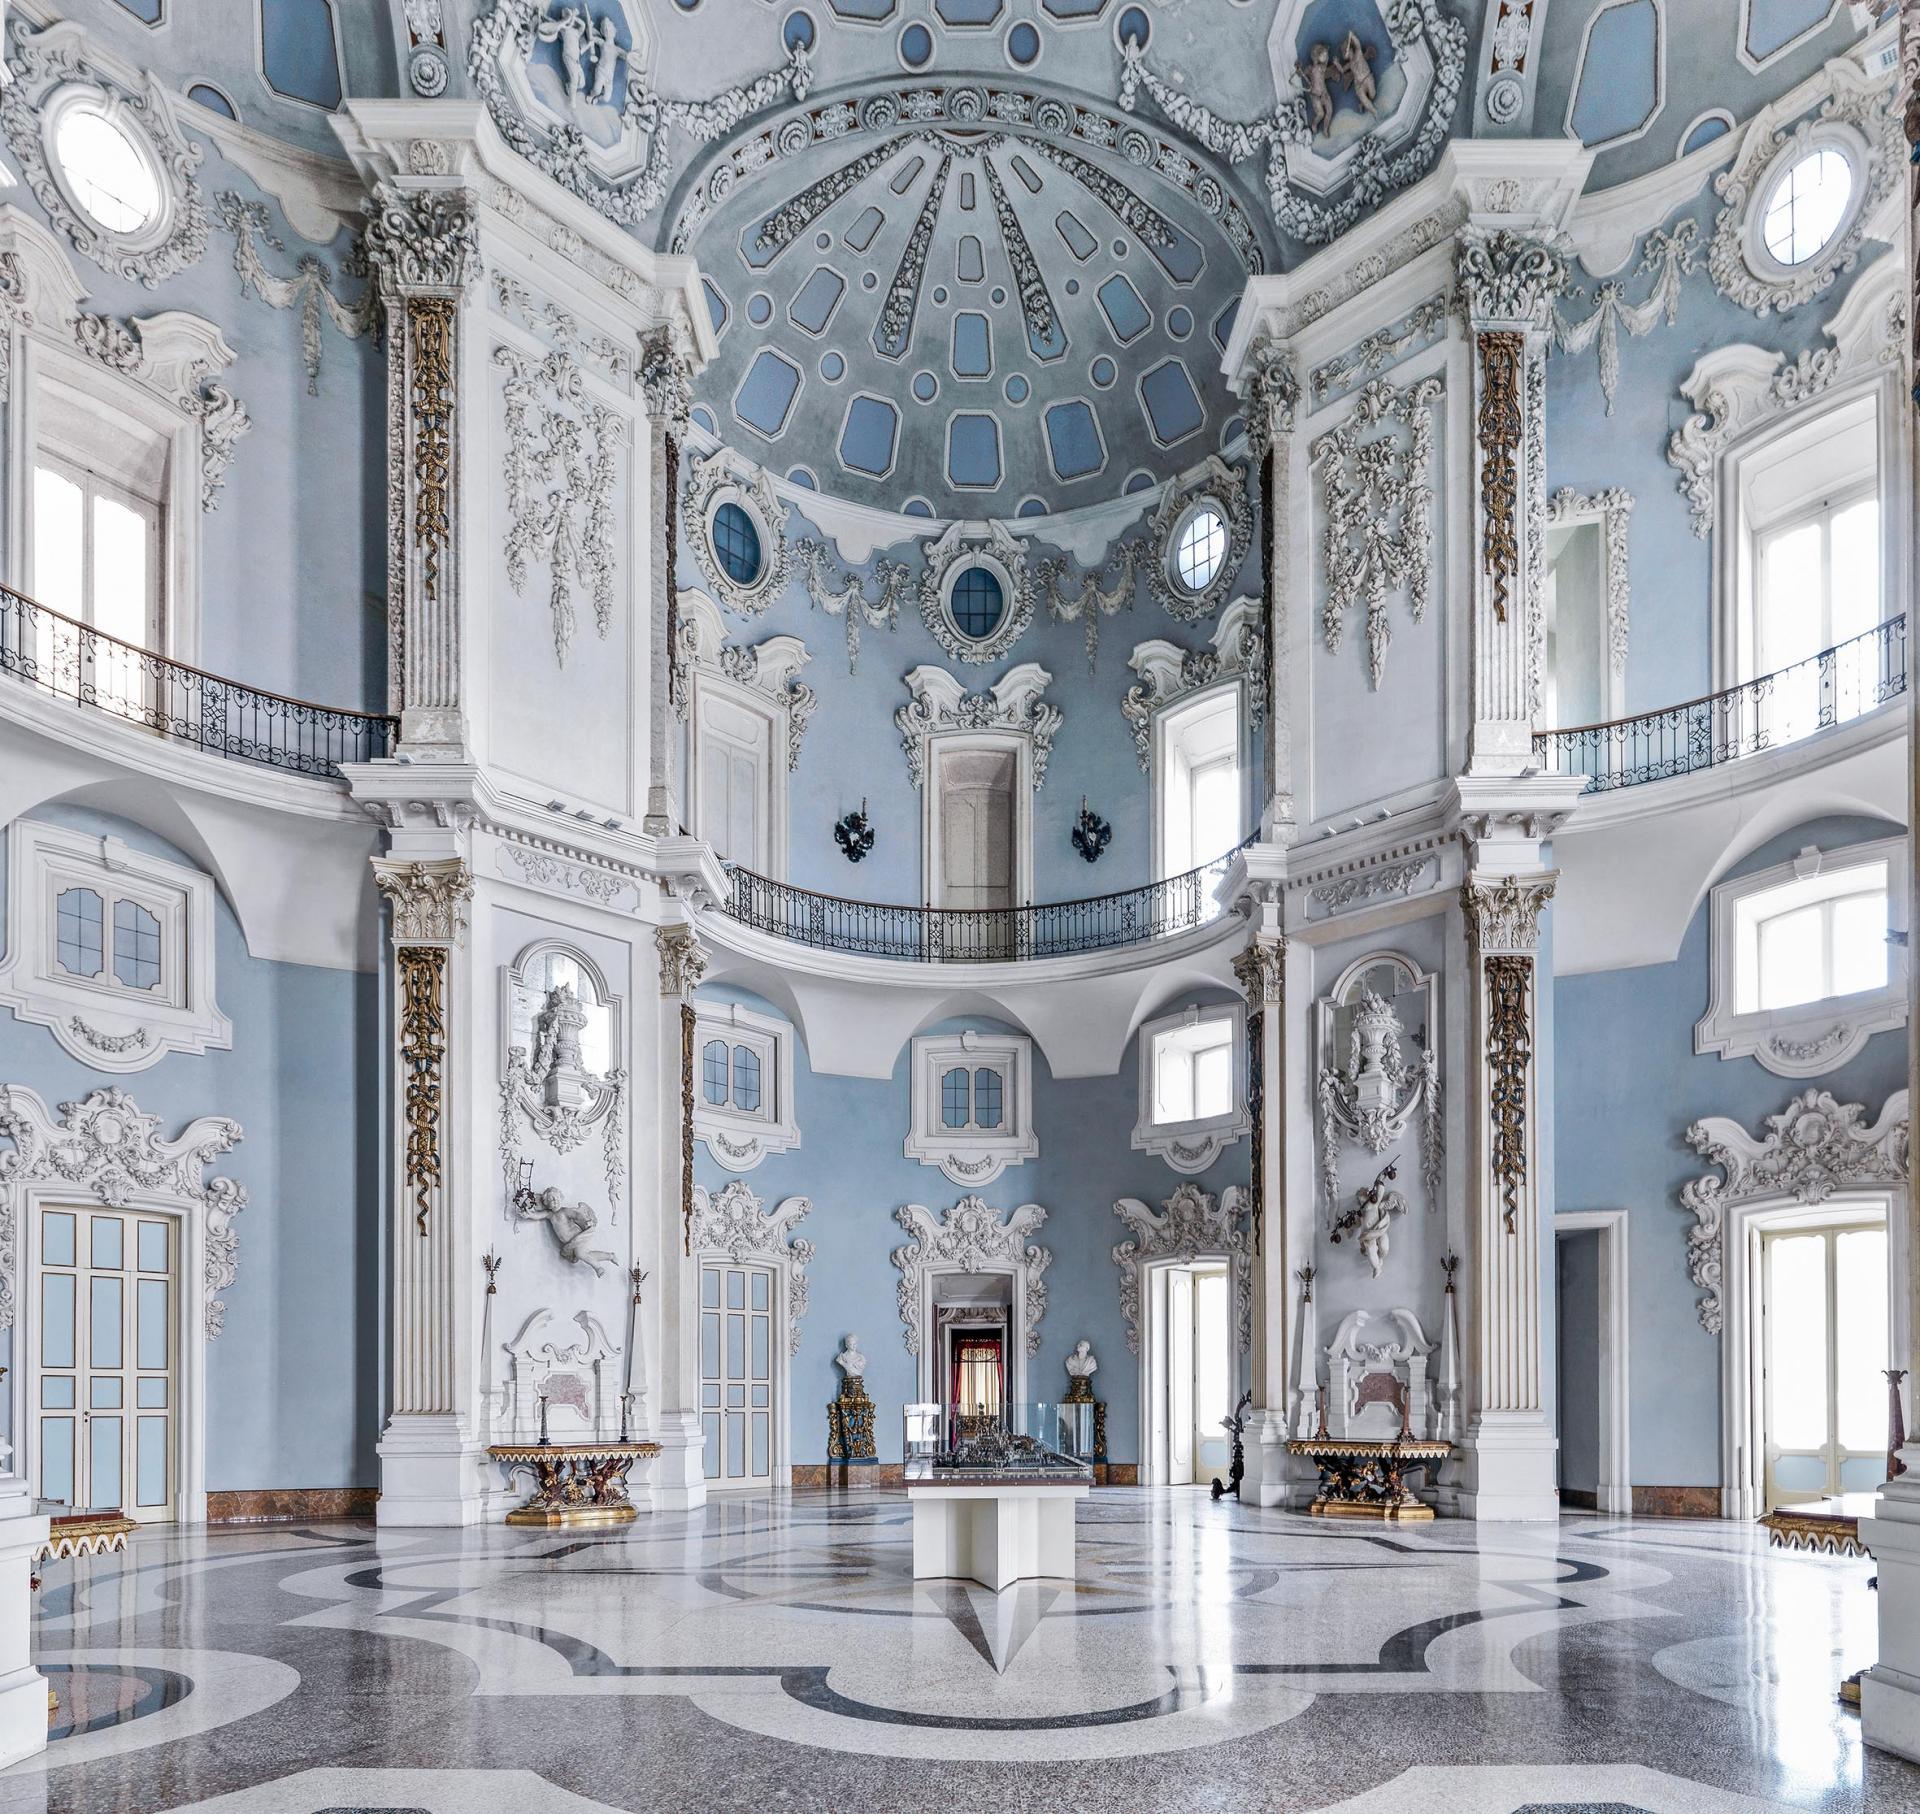 Palazzo Borromeo II, Isola Bella, 2018
C print
180 x 225 cm 
edition of 5 
Signed and numbered on the verso label

Also available
120 x 150 cm  Edition of 5  
100 x 120 cm) Edition of 5

The photographer is based in Florence, and is fascinated how